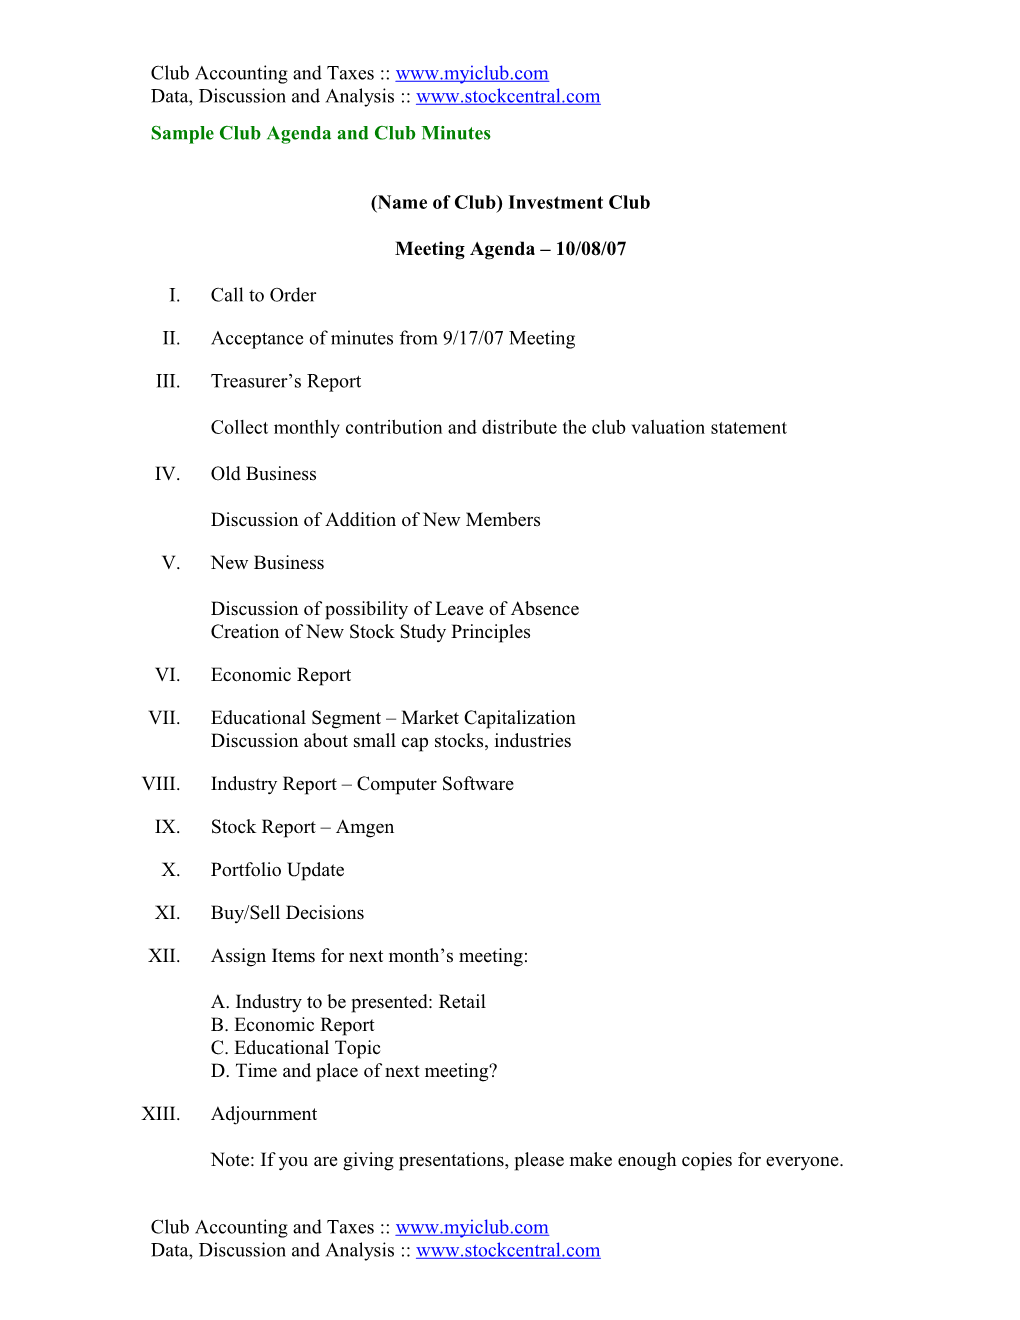 Sample Investment Club Meeting Agenda and Minutes